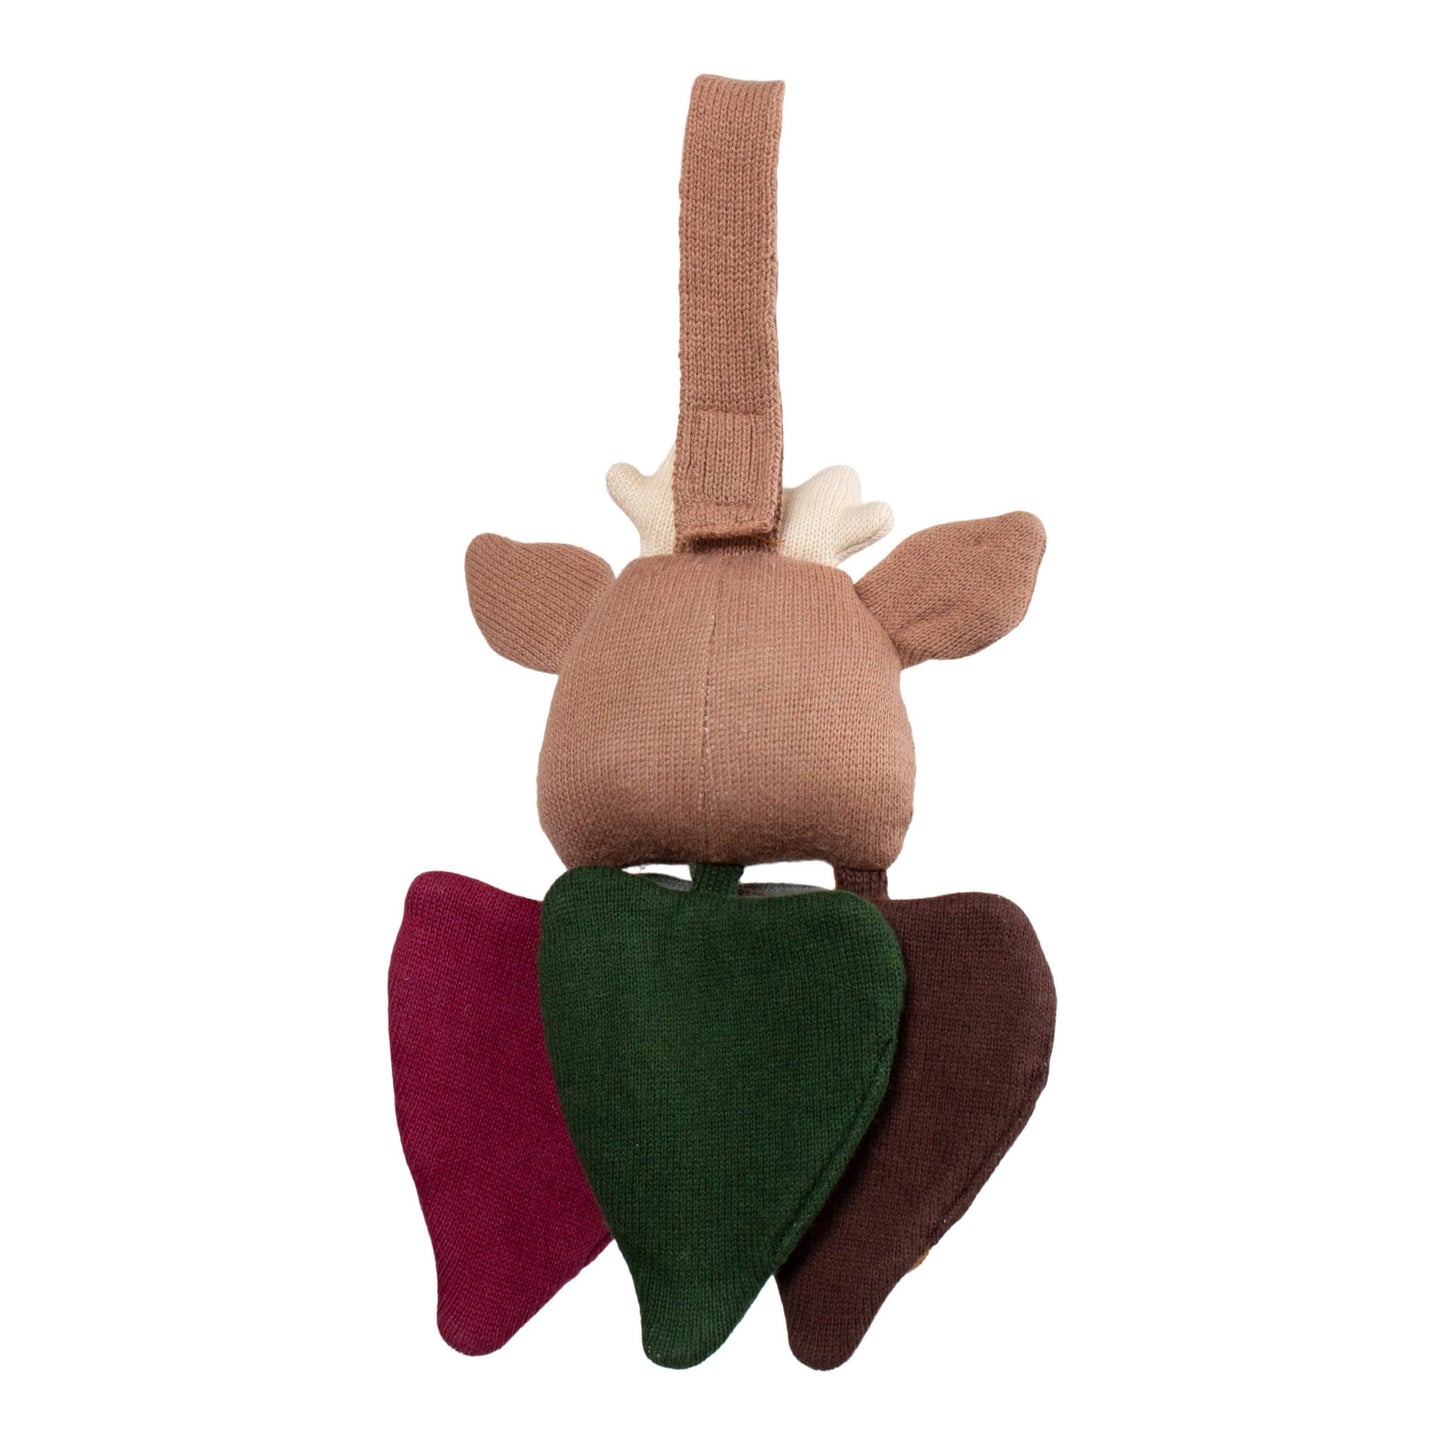 Bea the bambi touch & play baby activity toy